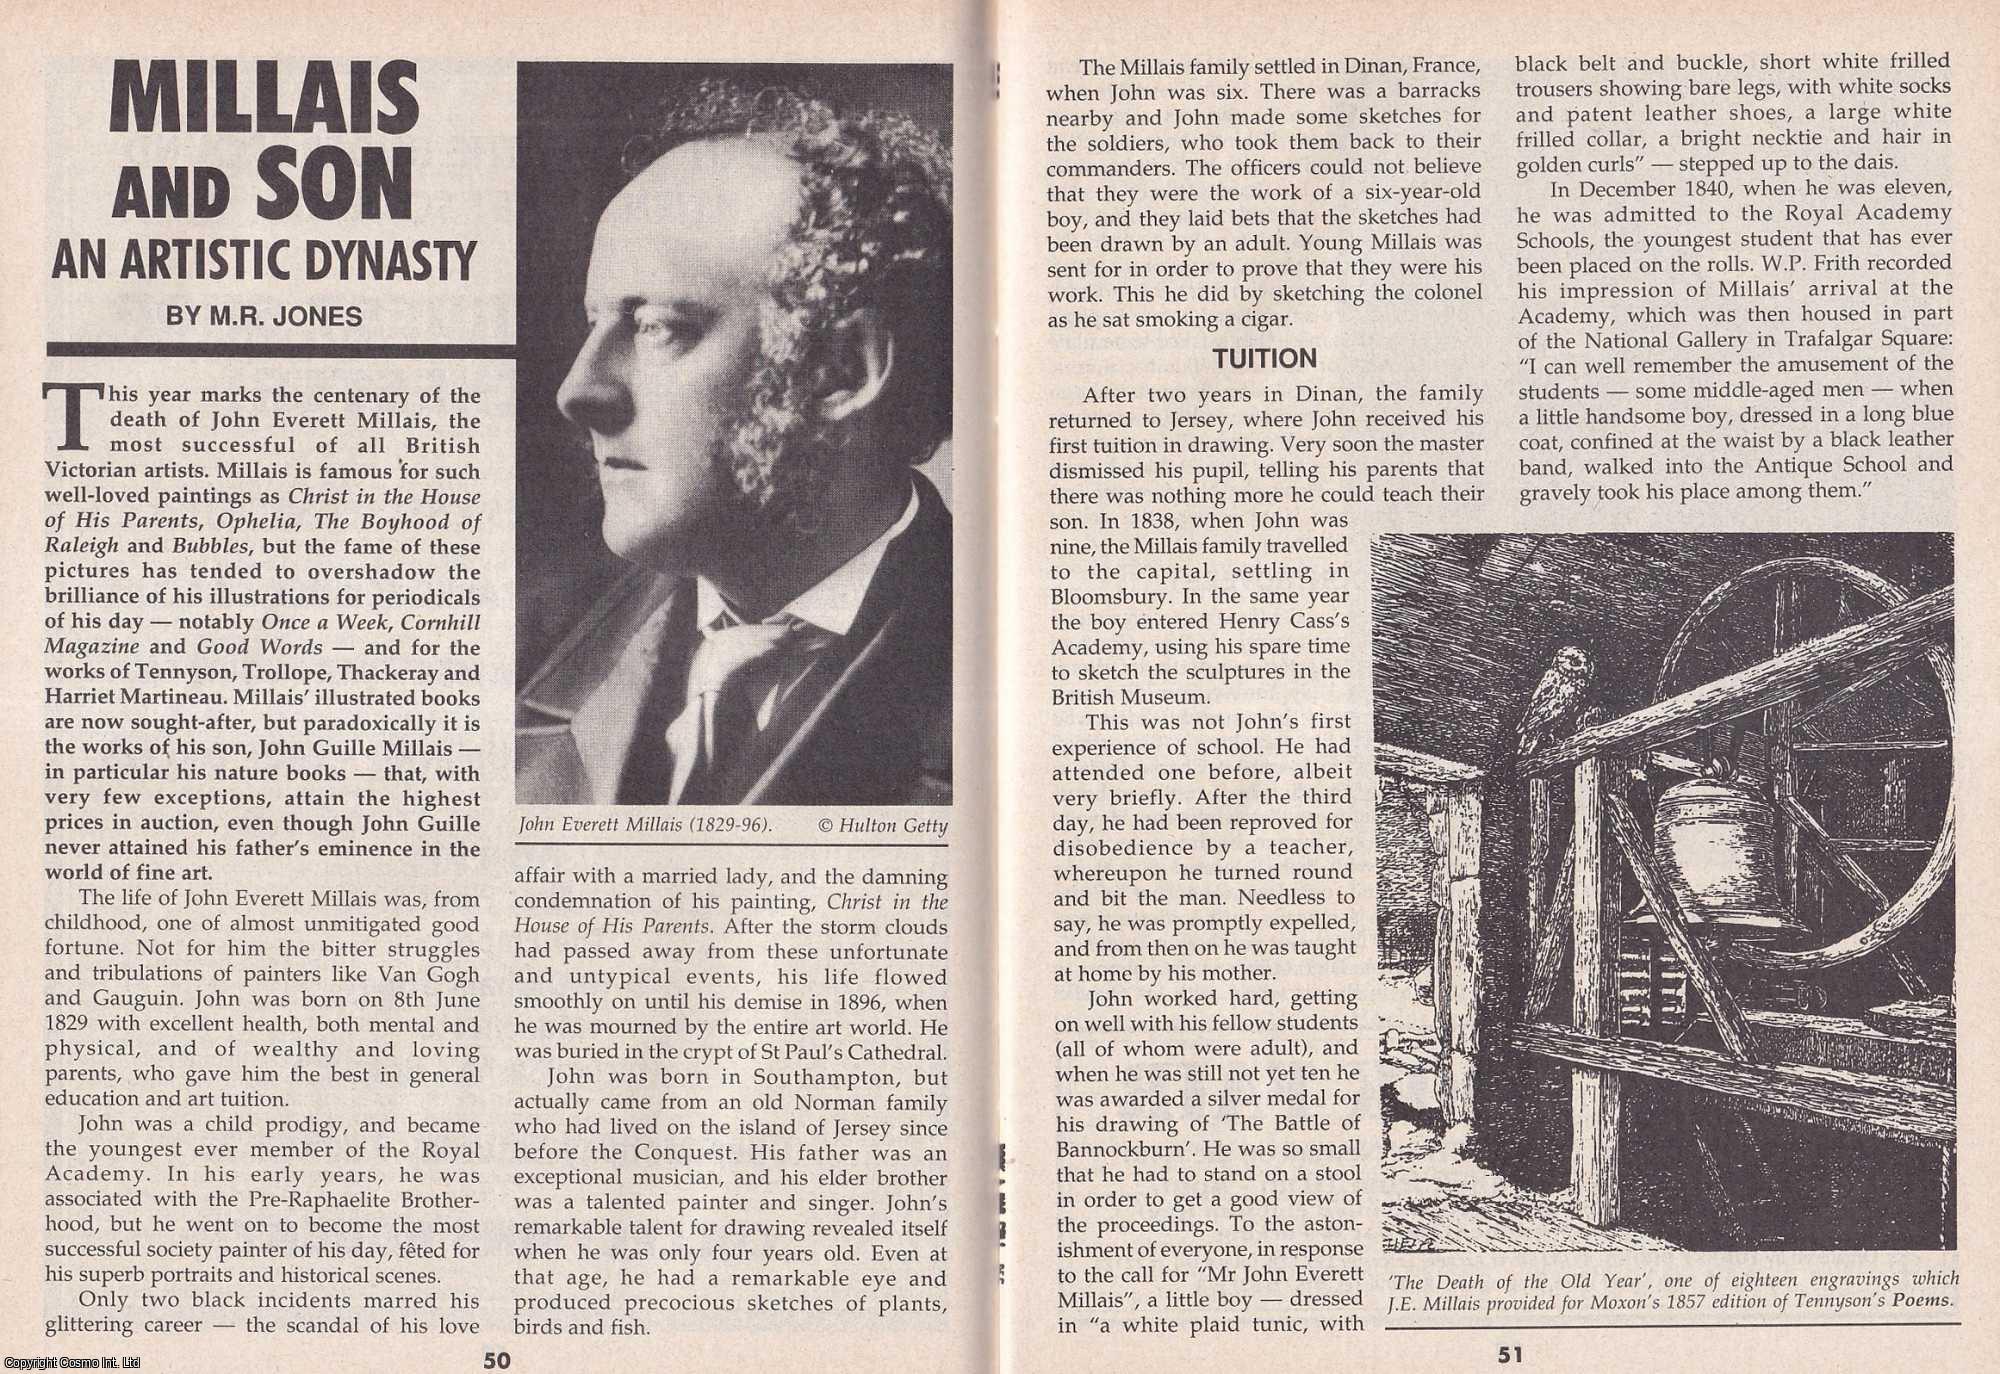 M. R. Jones - Millais and Son. An Artist Dynasty. This is an original article separated from an issue of The Book & Magazine Collector publication.